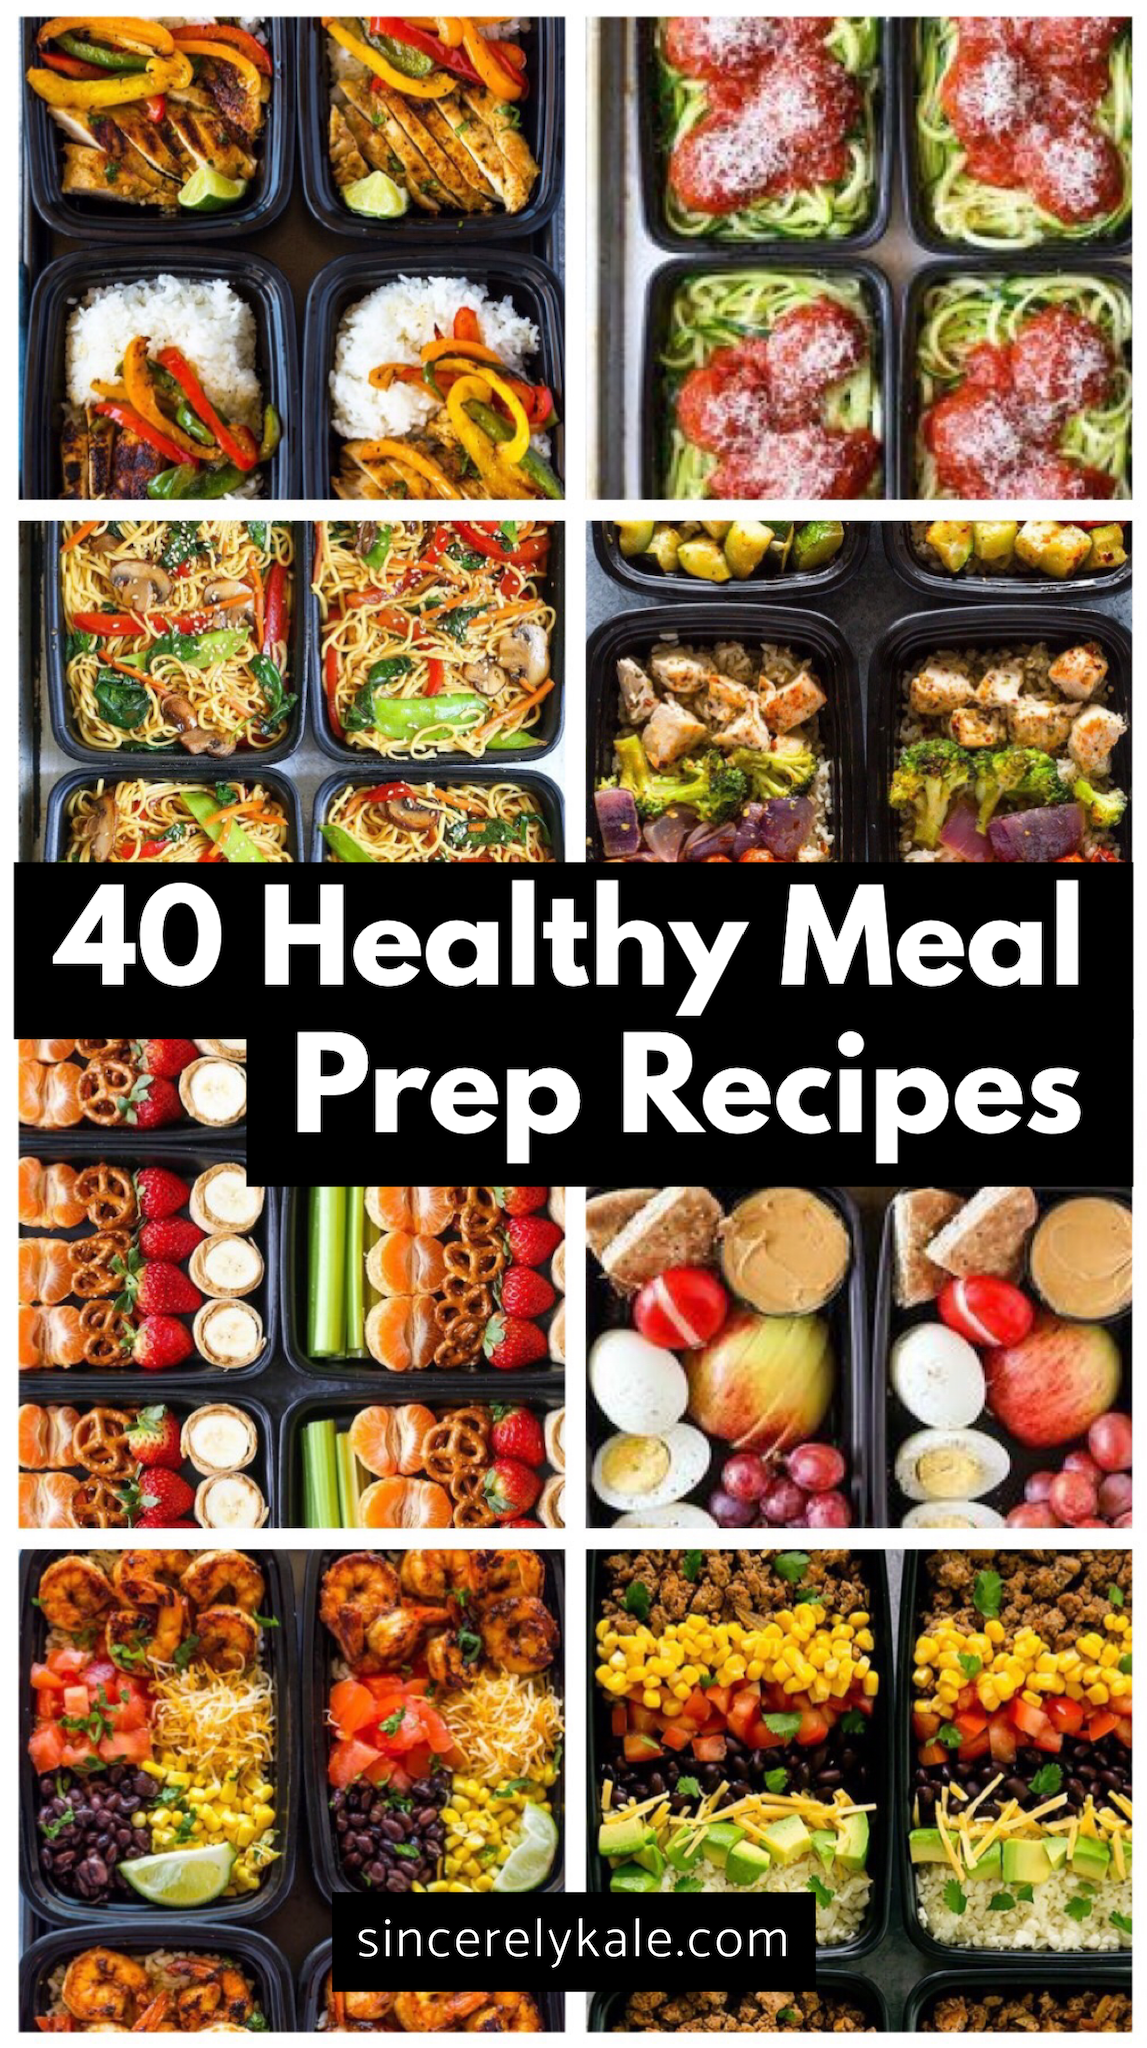 40 Healthy Meal Prep Recipes to Make For The Week - Sincerely Kale -   17 healthy recipes For The Week money ideas